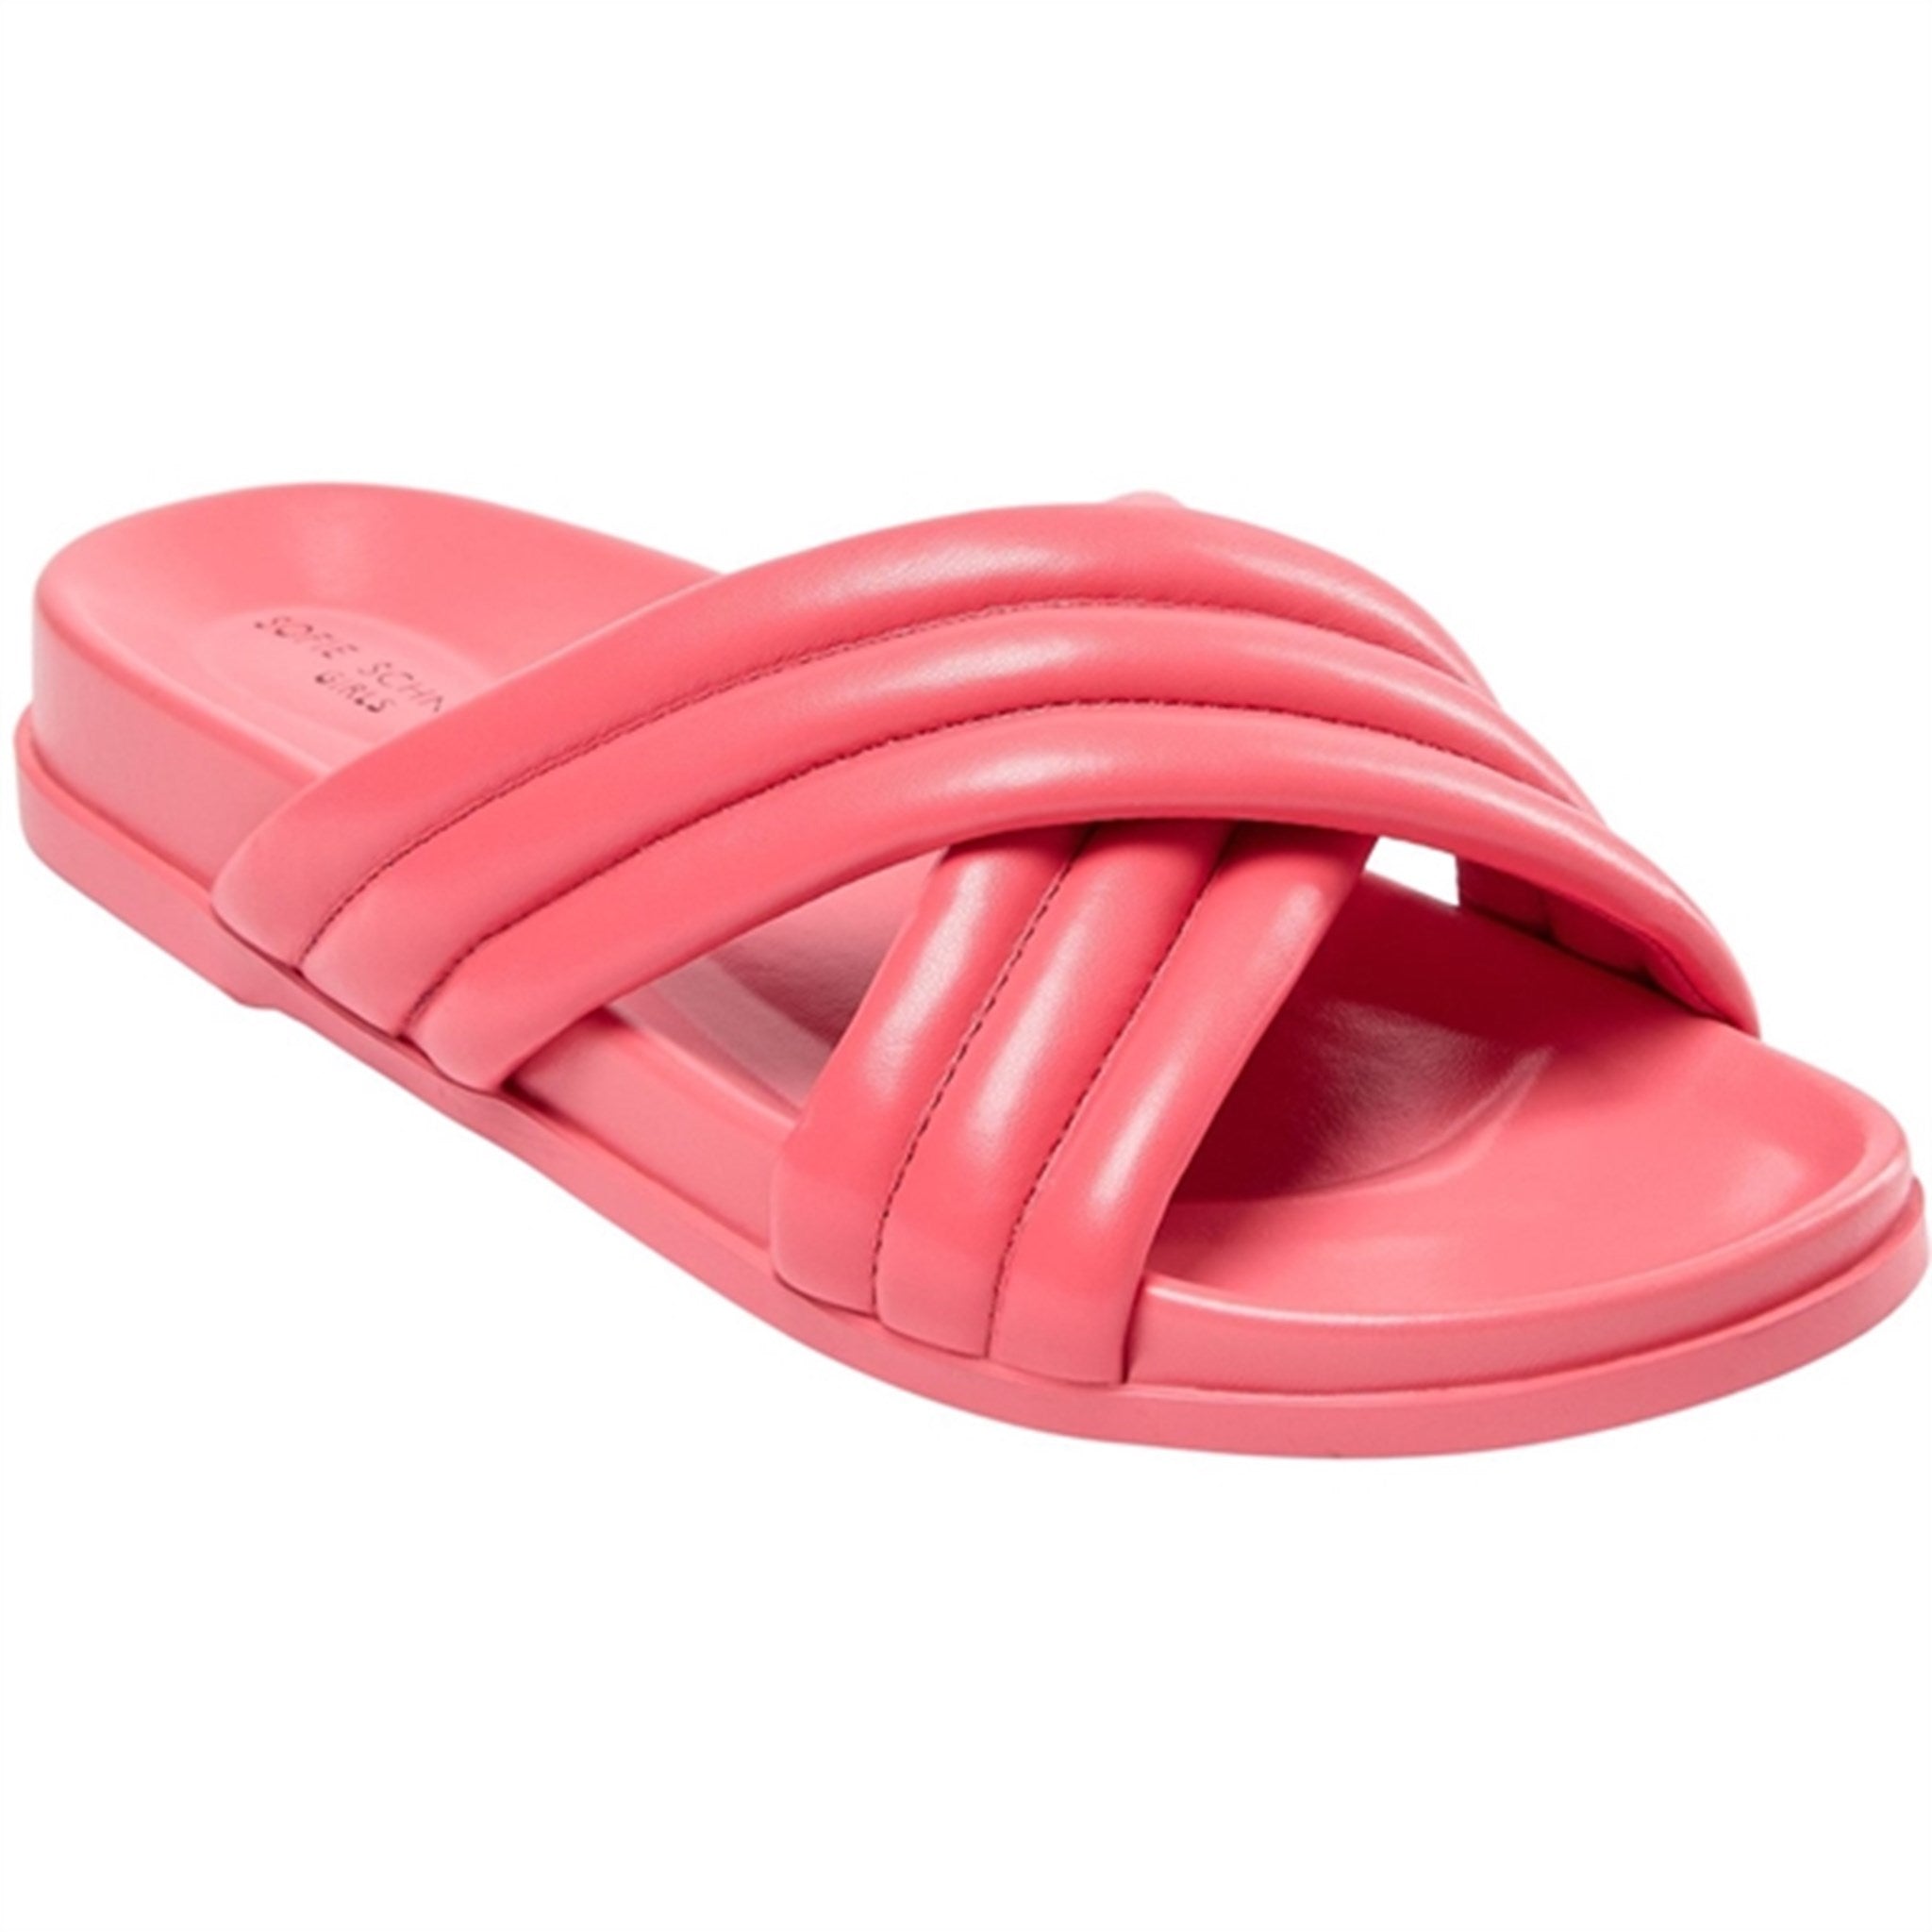 Sofie Schnoor Young Sandal Coral pink 6